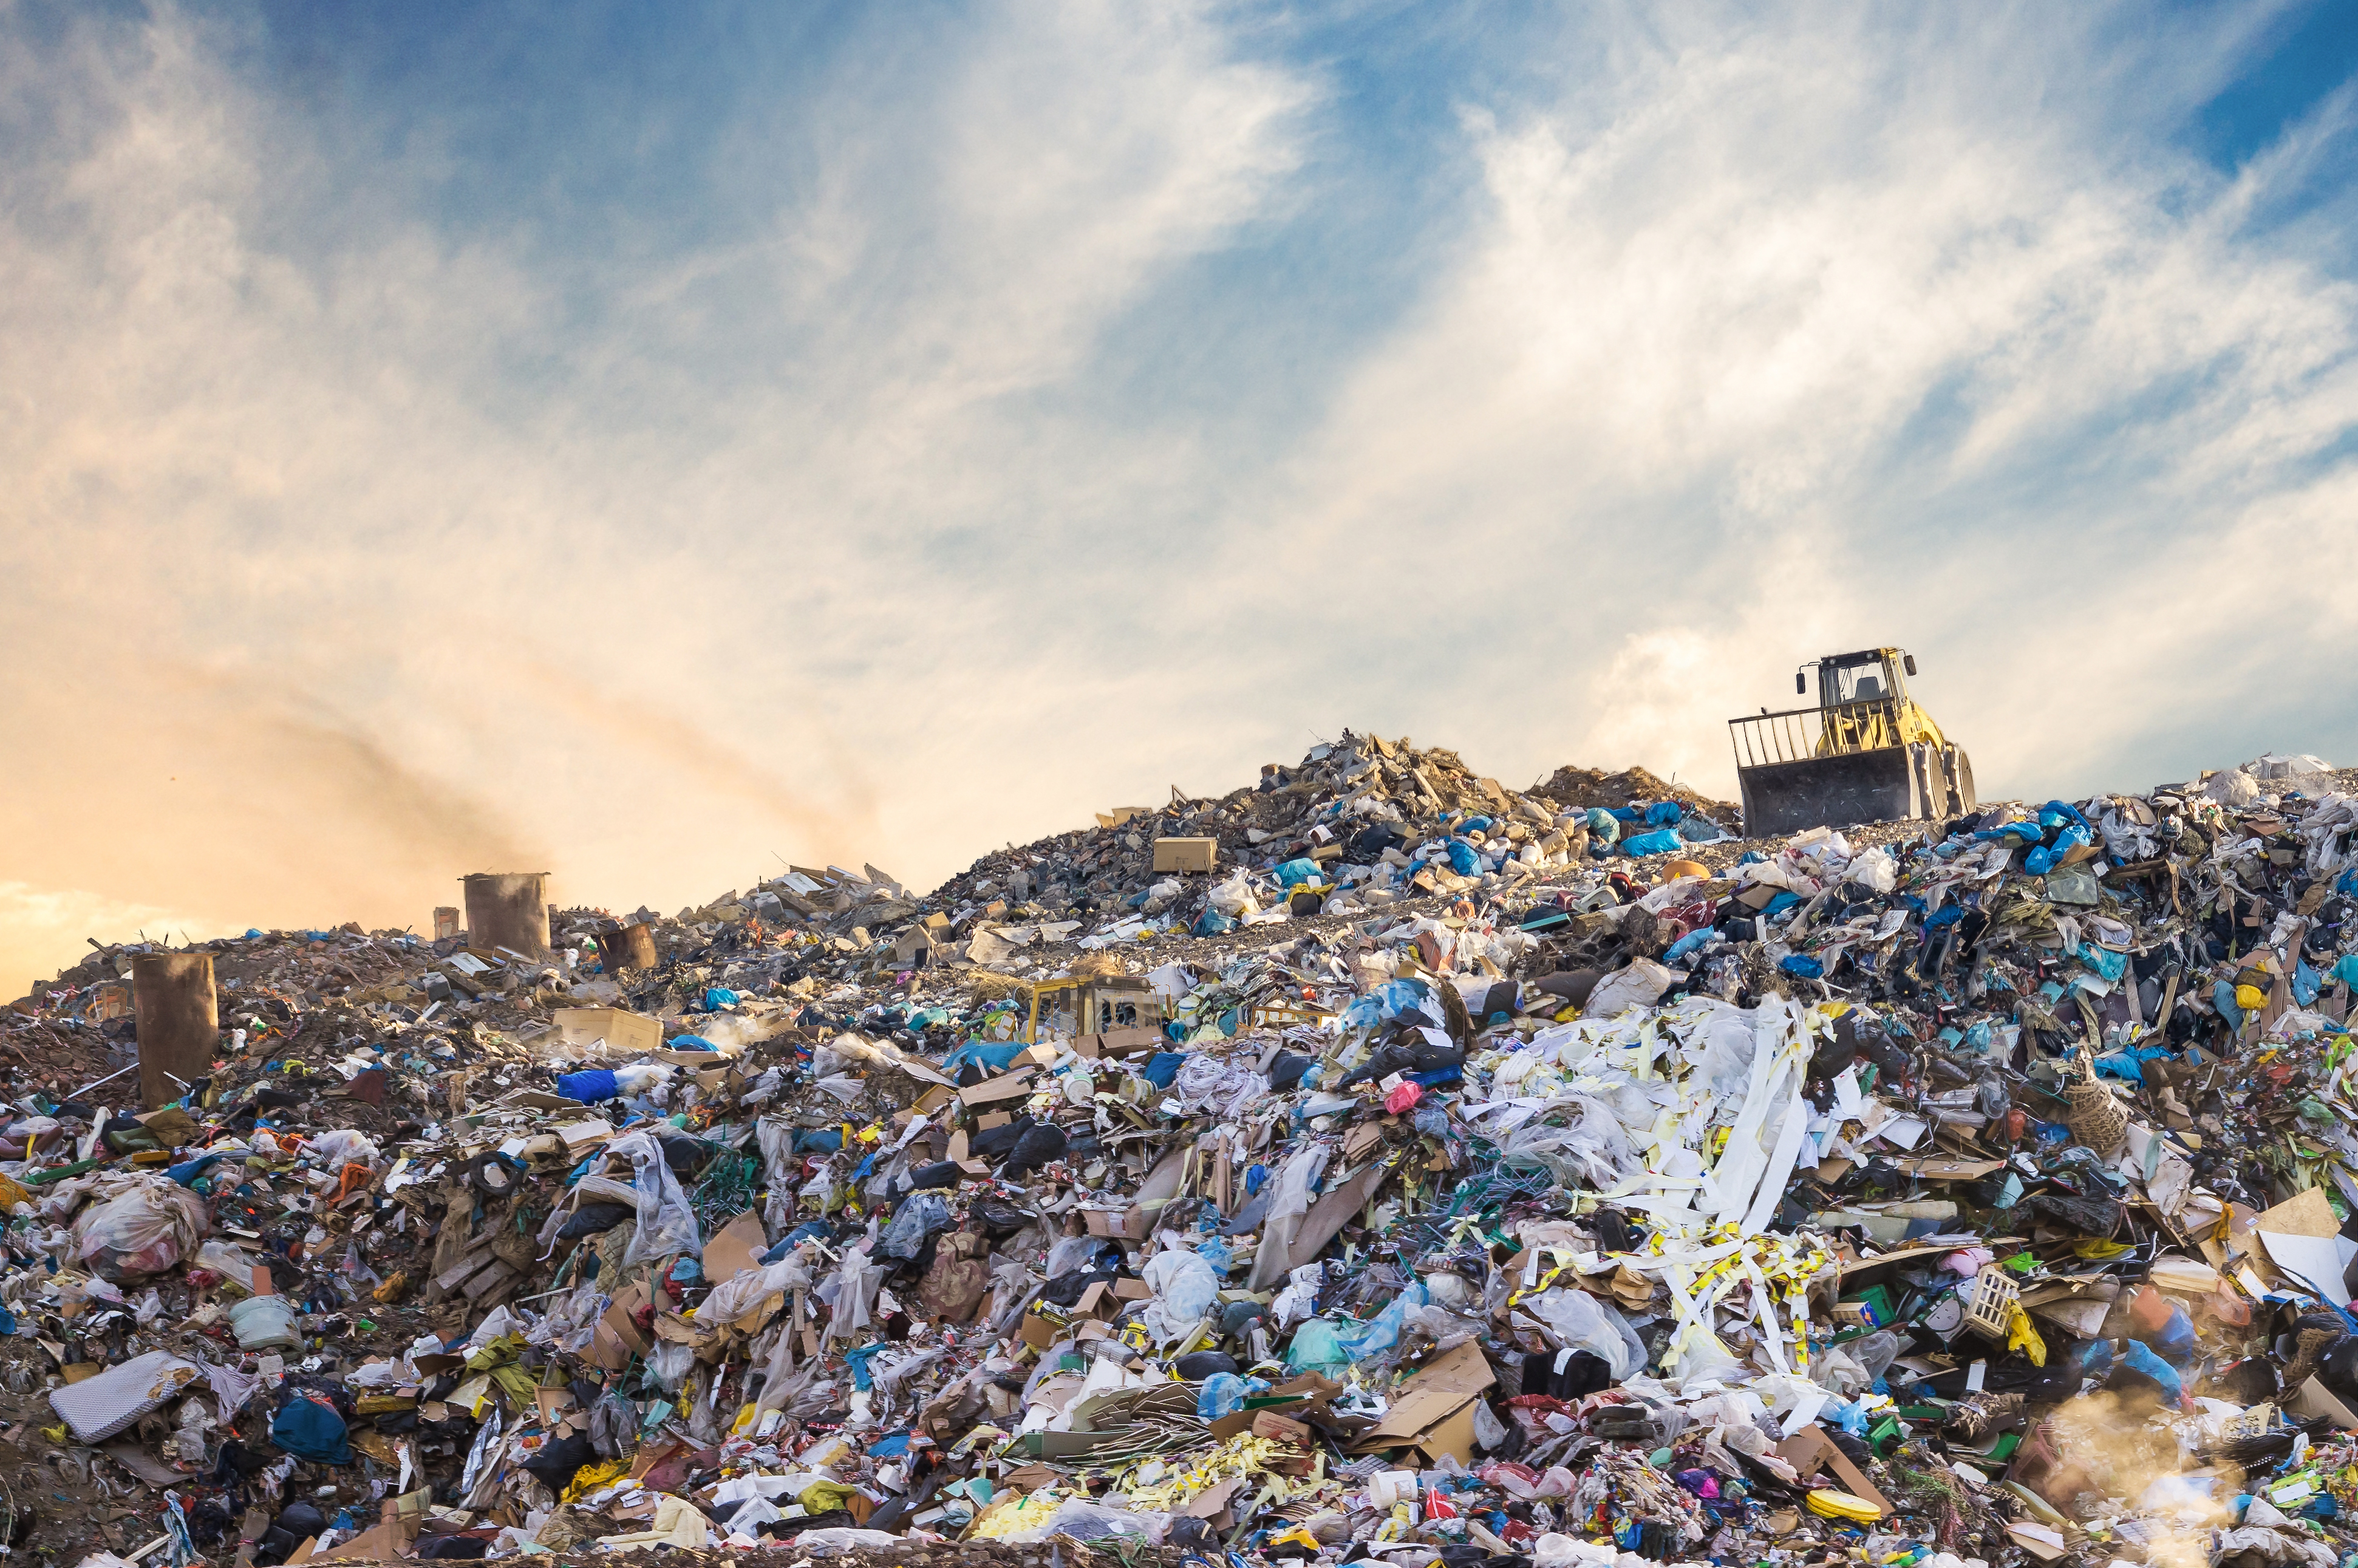 Stock image of a landfill